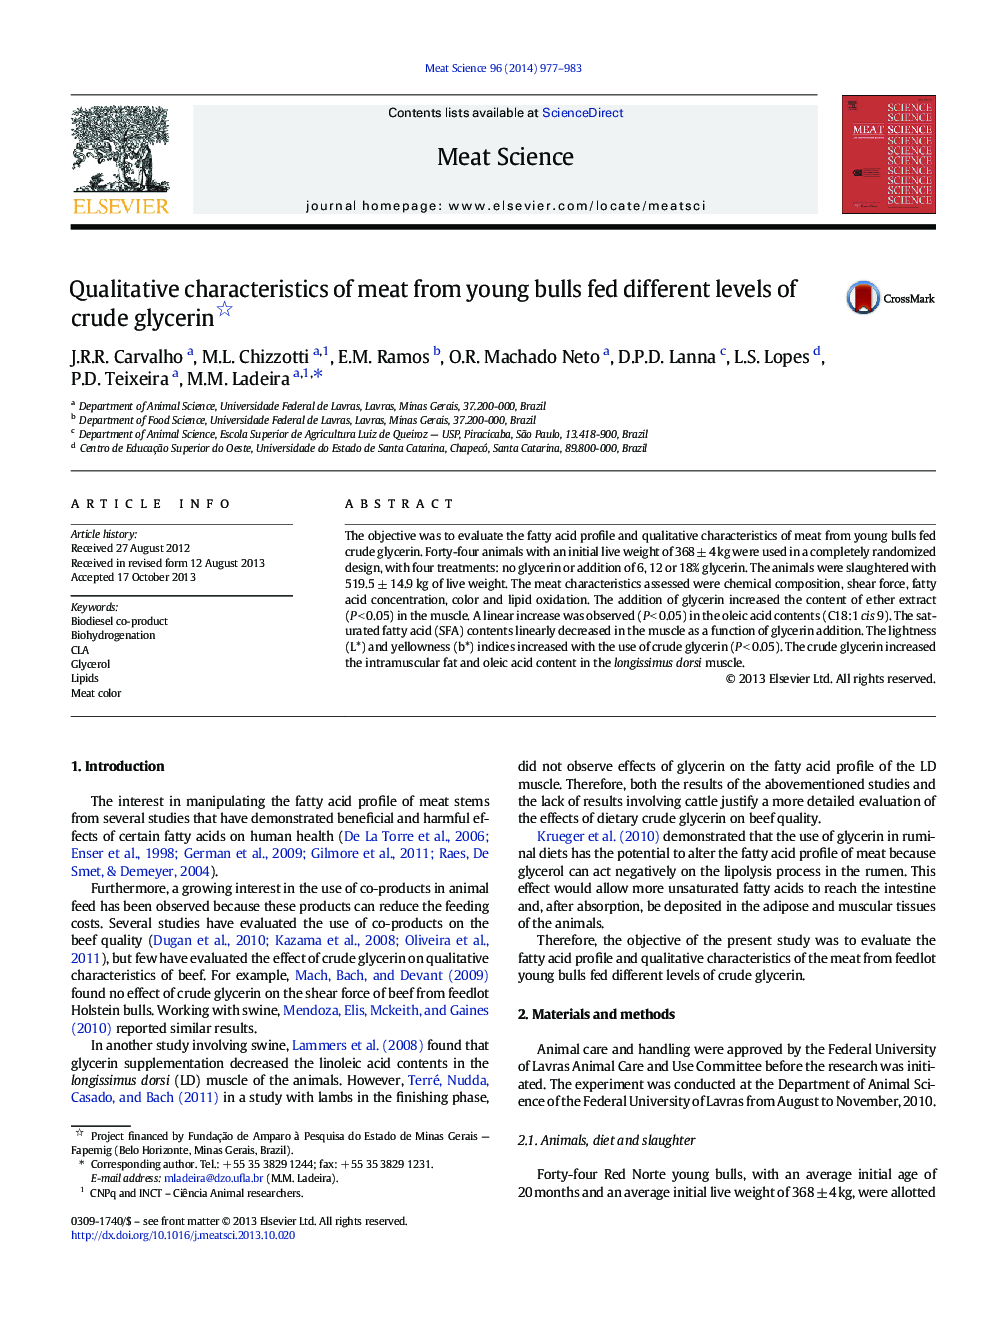 Qualitative characteristics of meat from young bulls fed different levels of crude glycerin